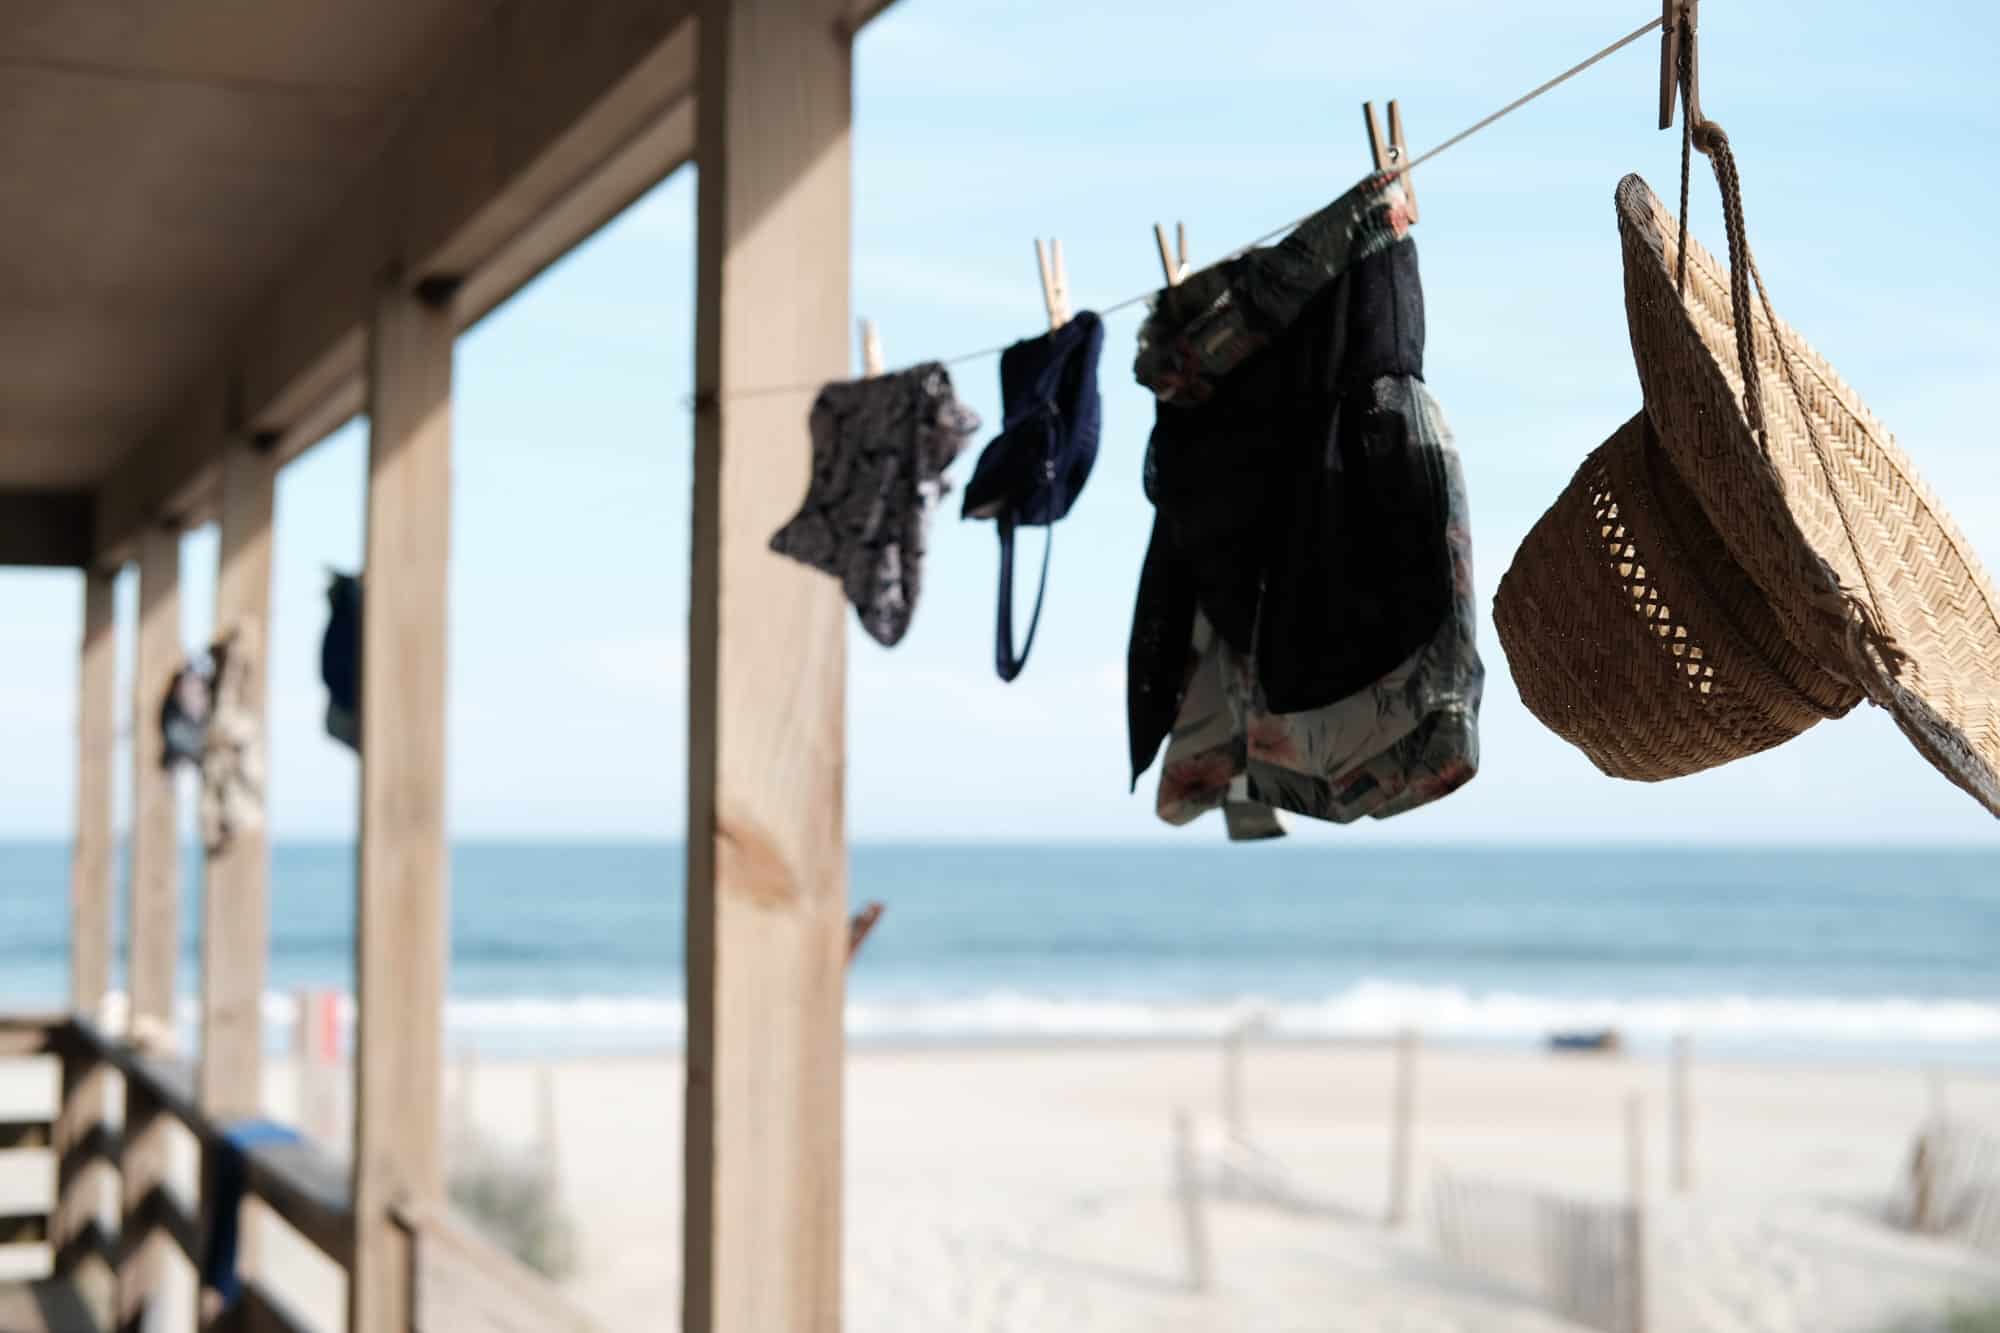 Clothes hanging on washing line near beach